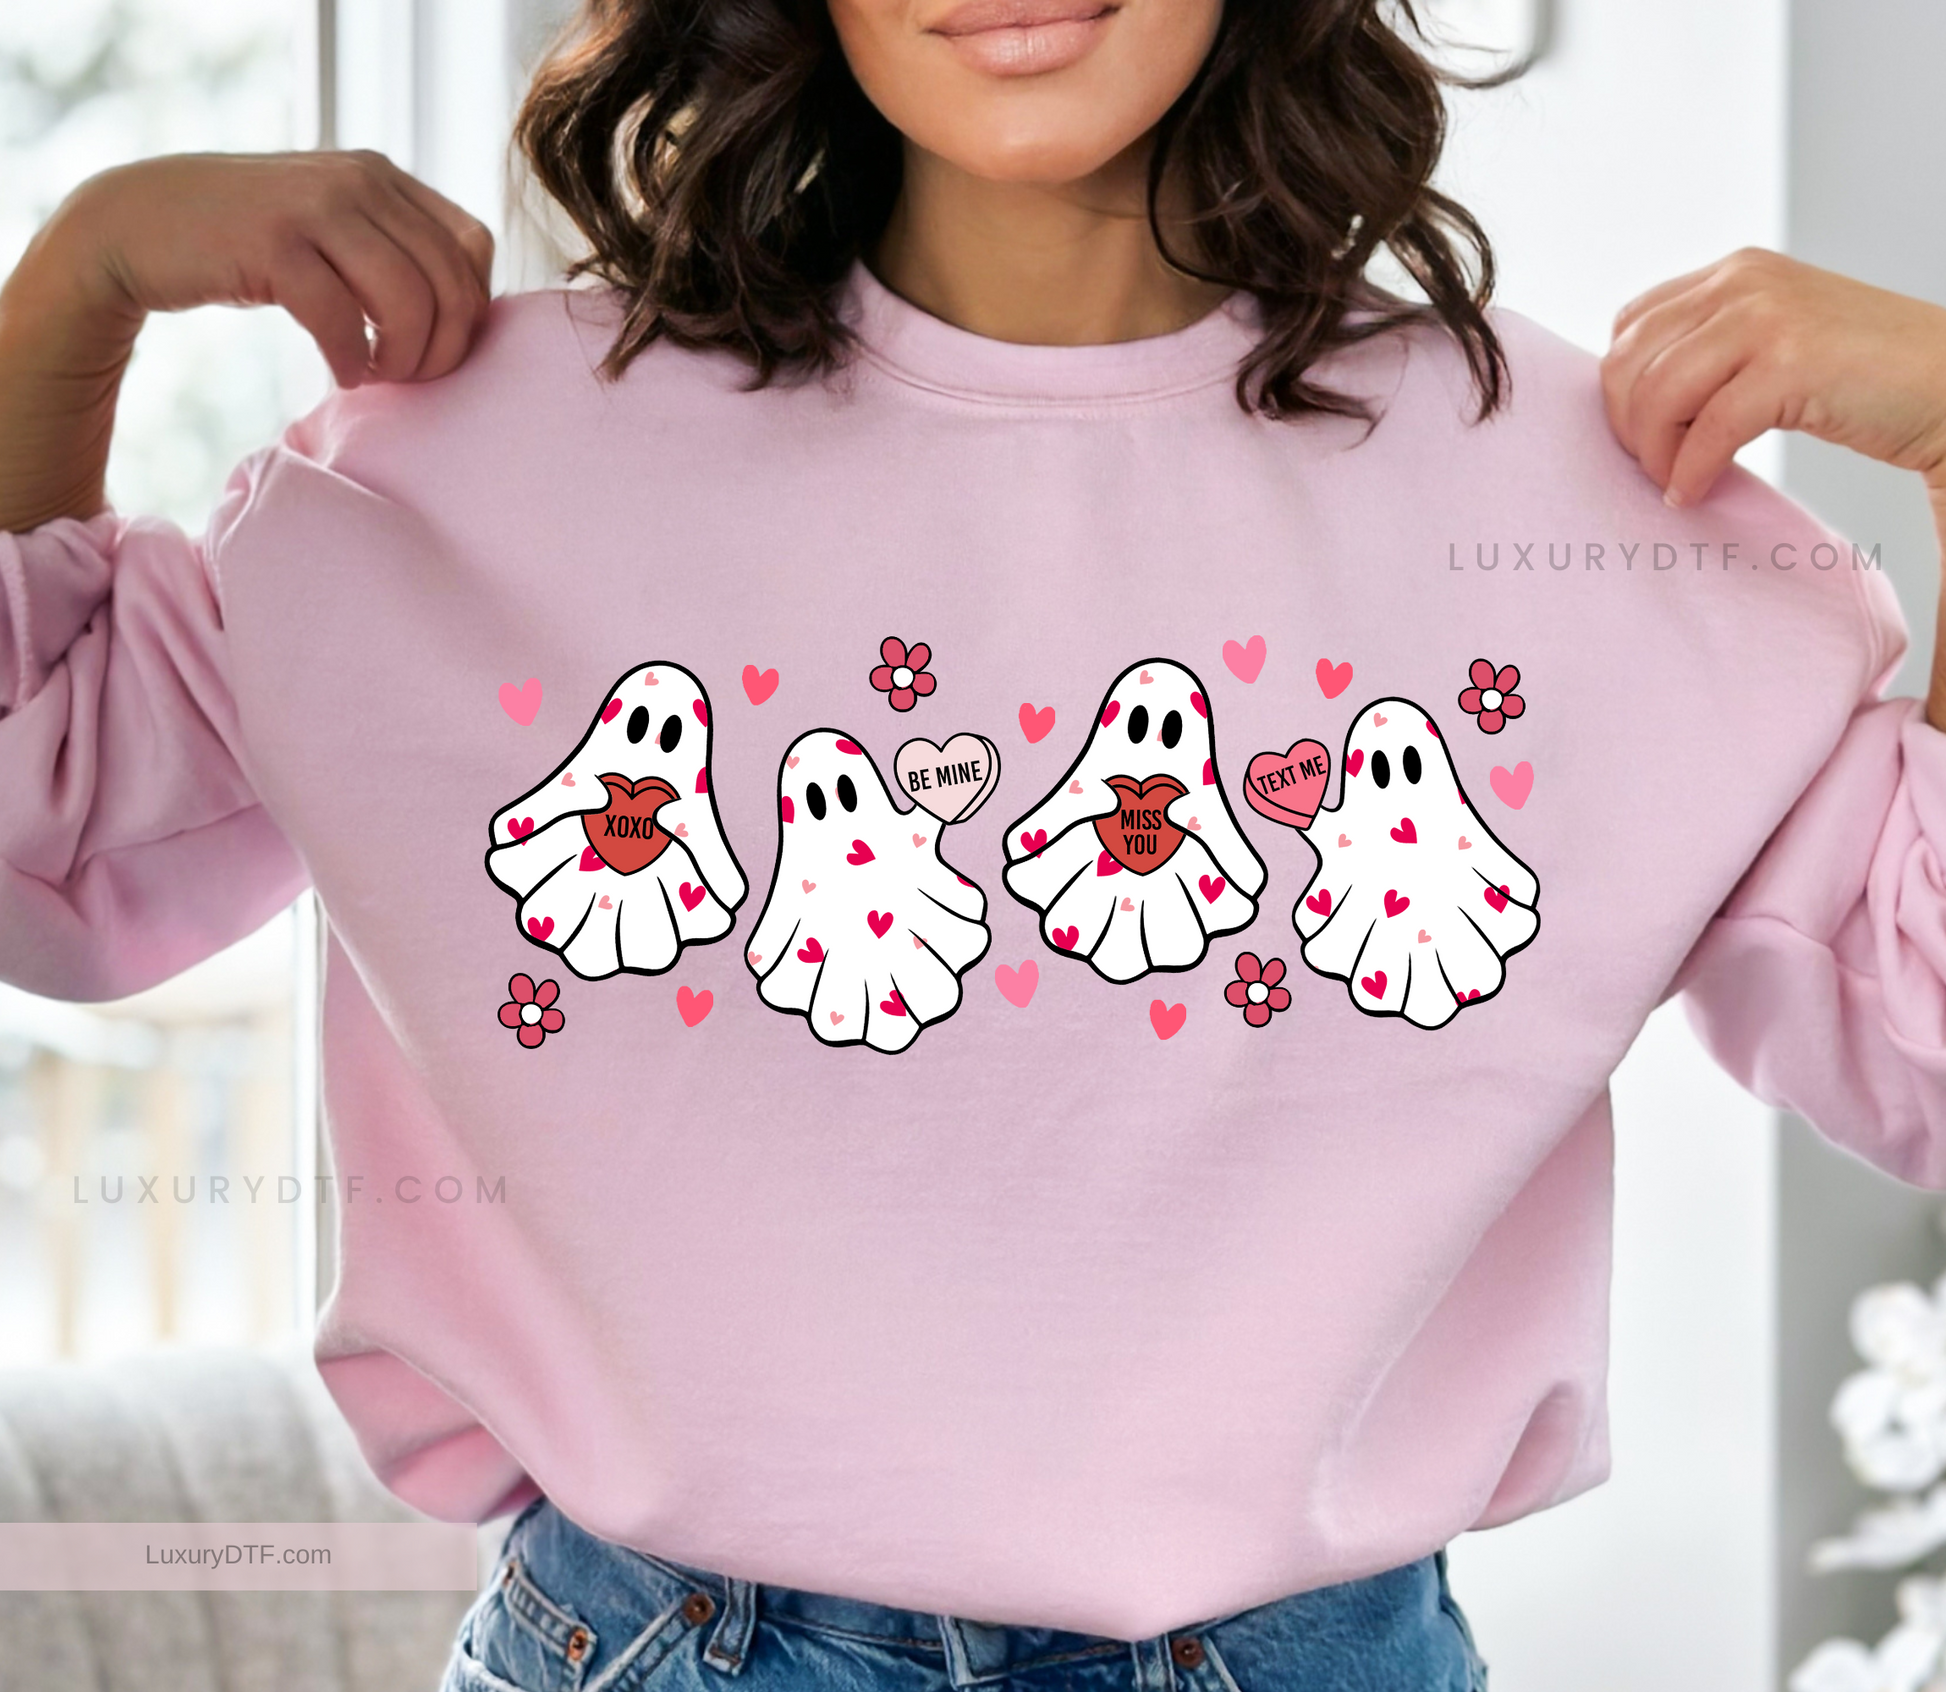 Cute Valentine retro ghosts, with red and pink hearts design DTF Transfer ready to press in seconds to most fabrics | LuxuryDTf.com